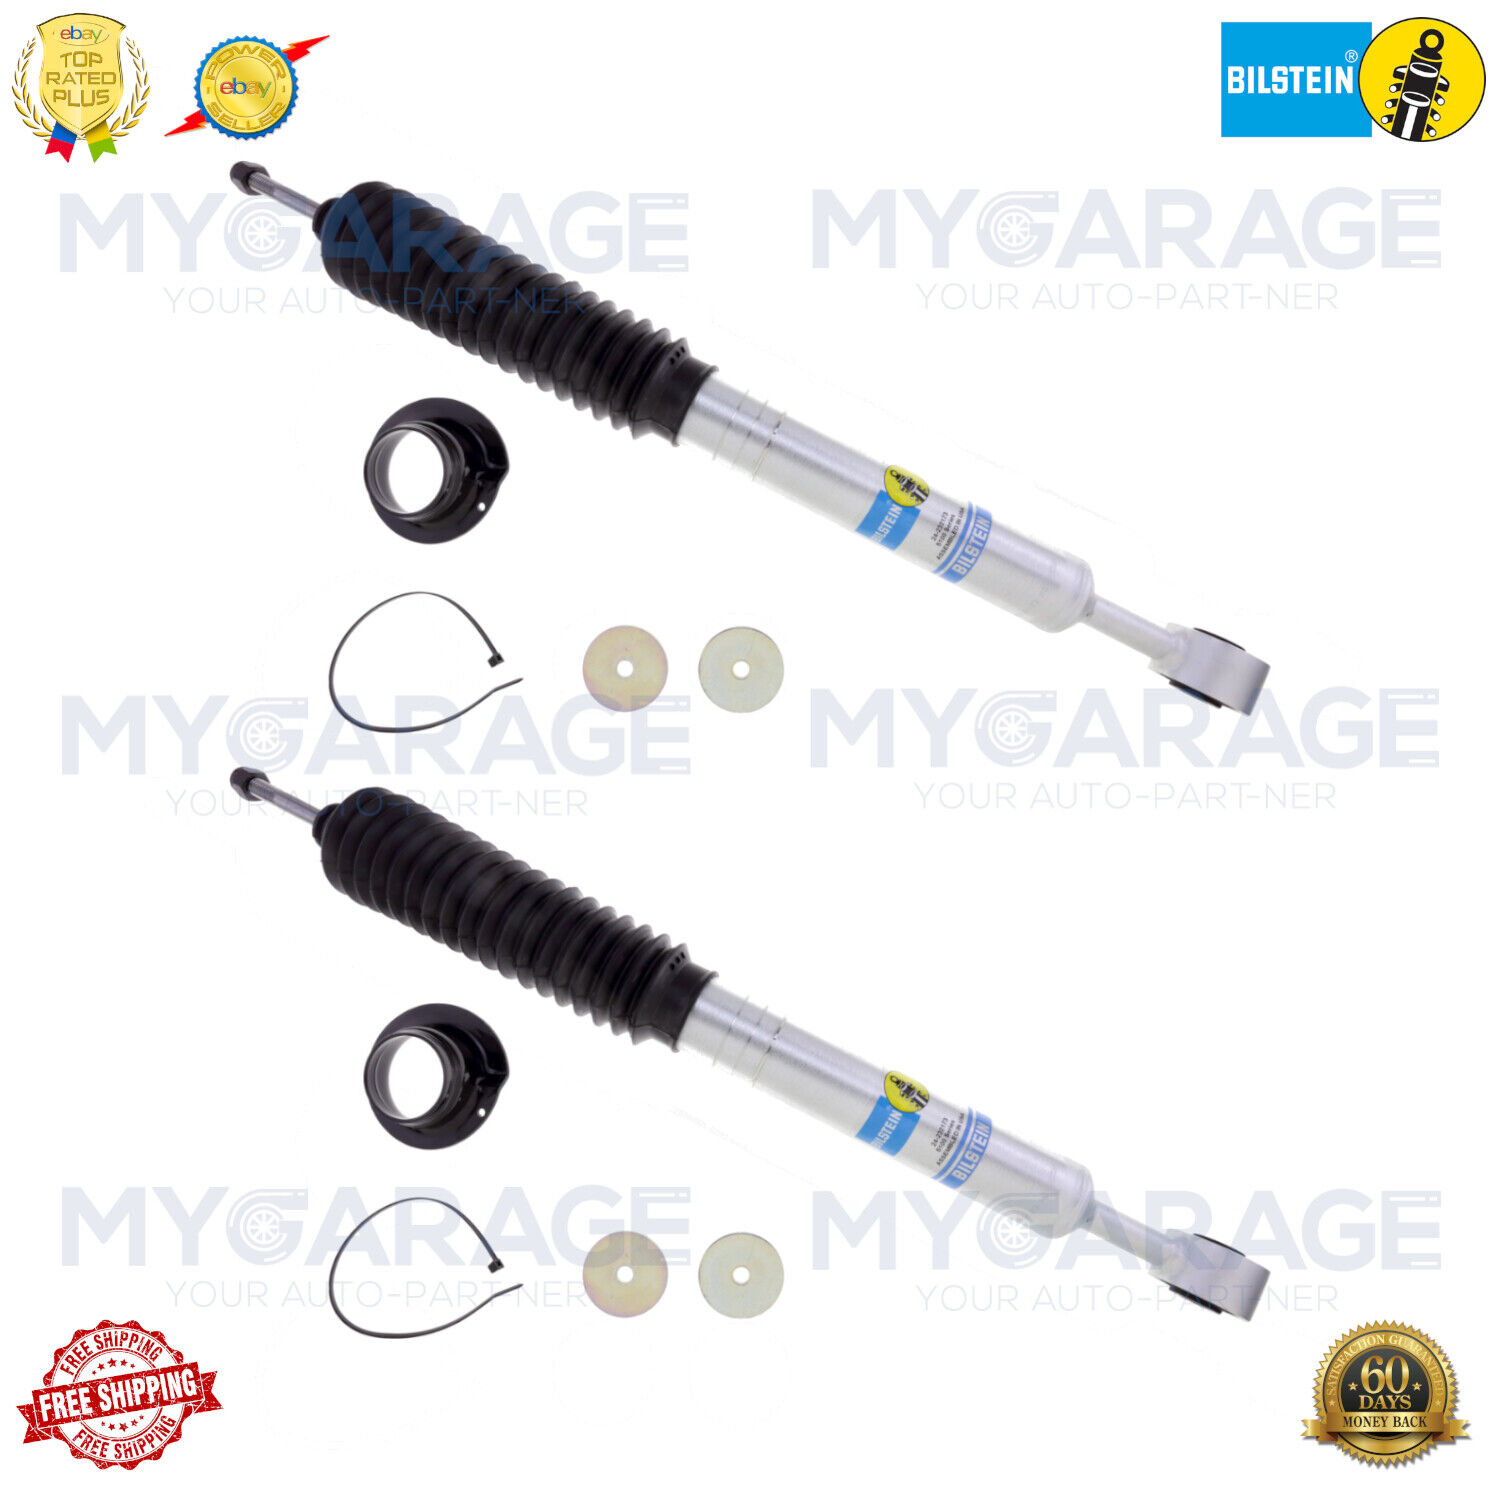 Bilstein B8 5100 Front Rear Shock Absorbers Kit For Toyota Tundra